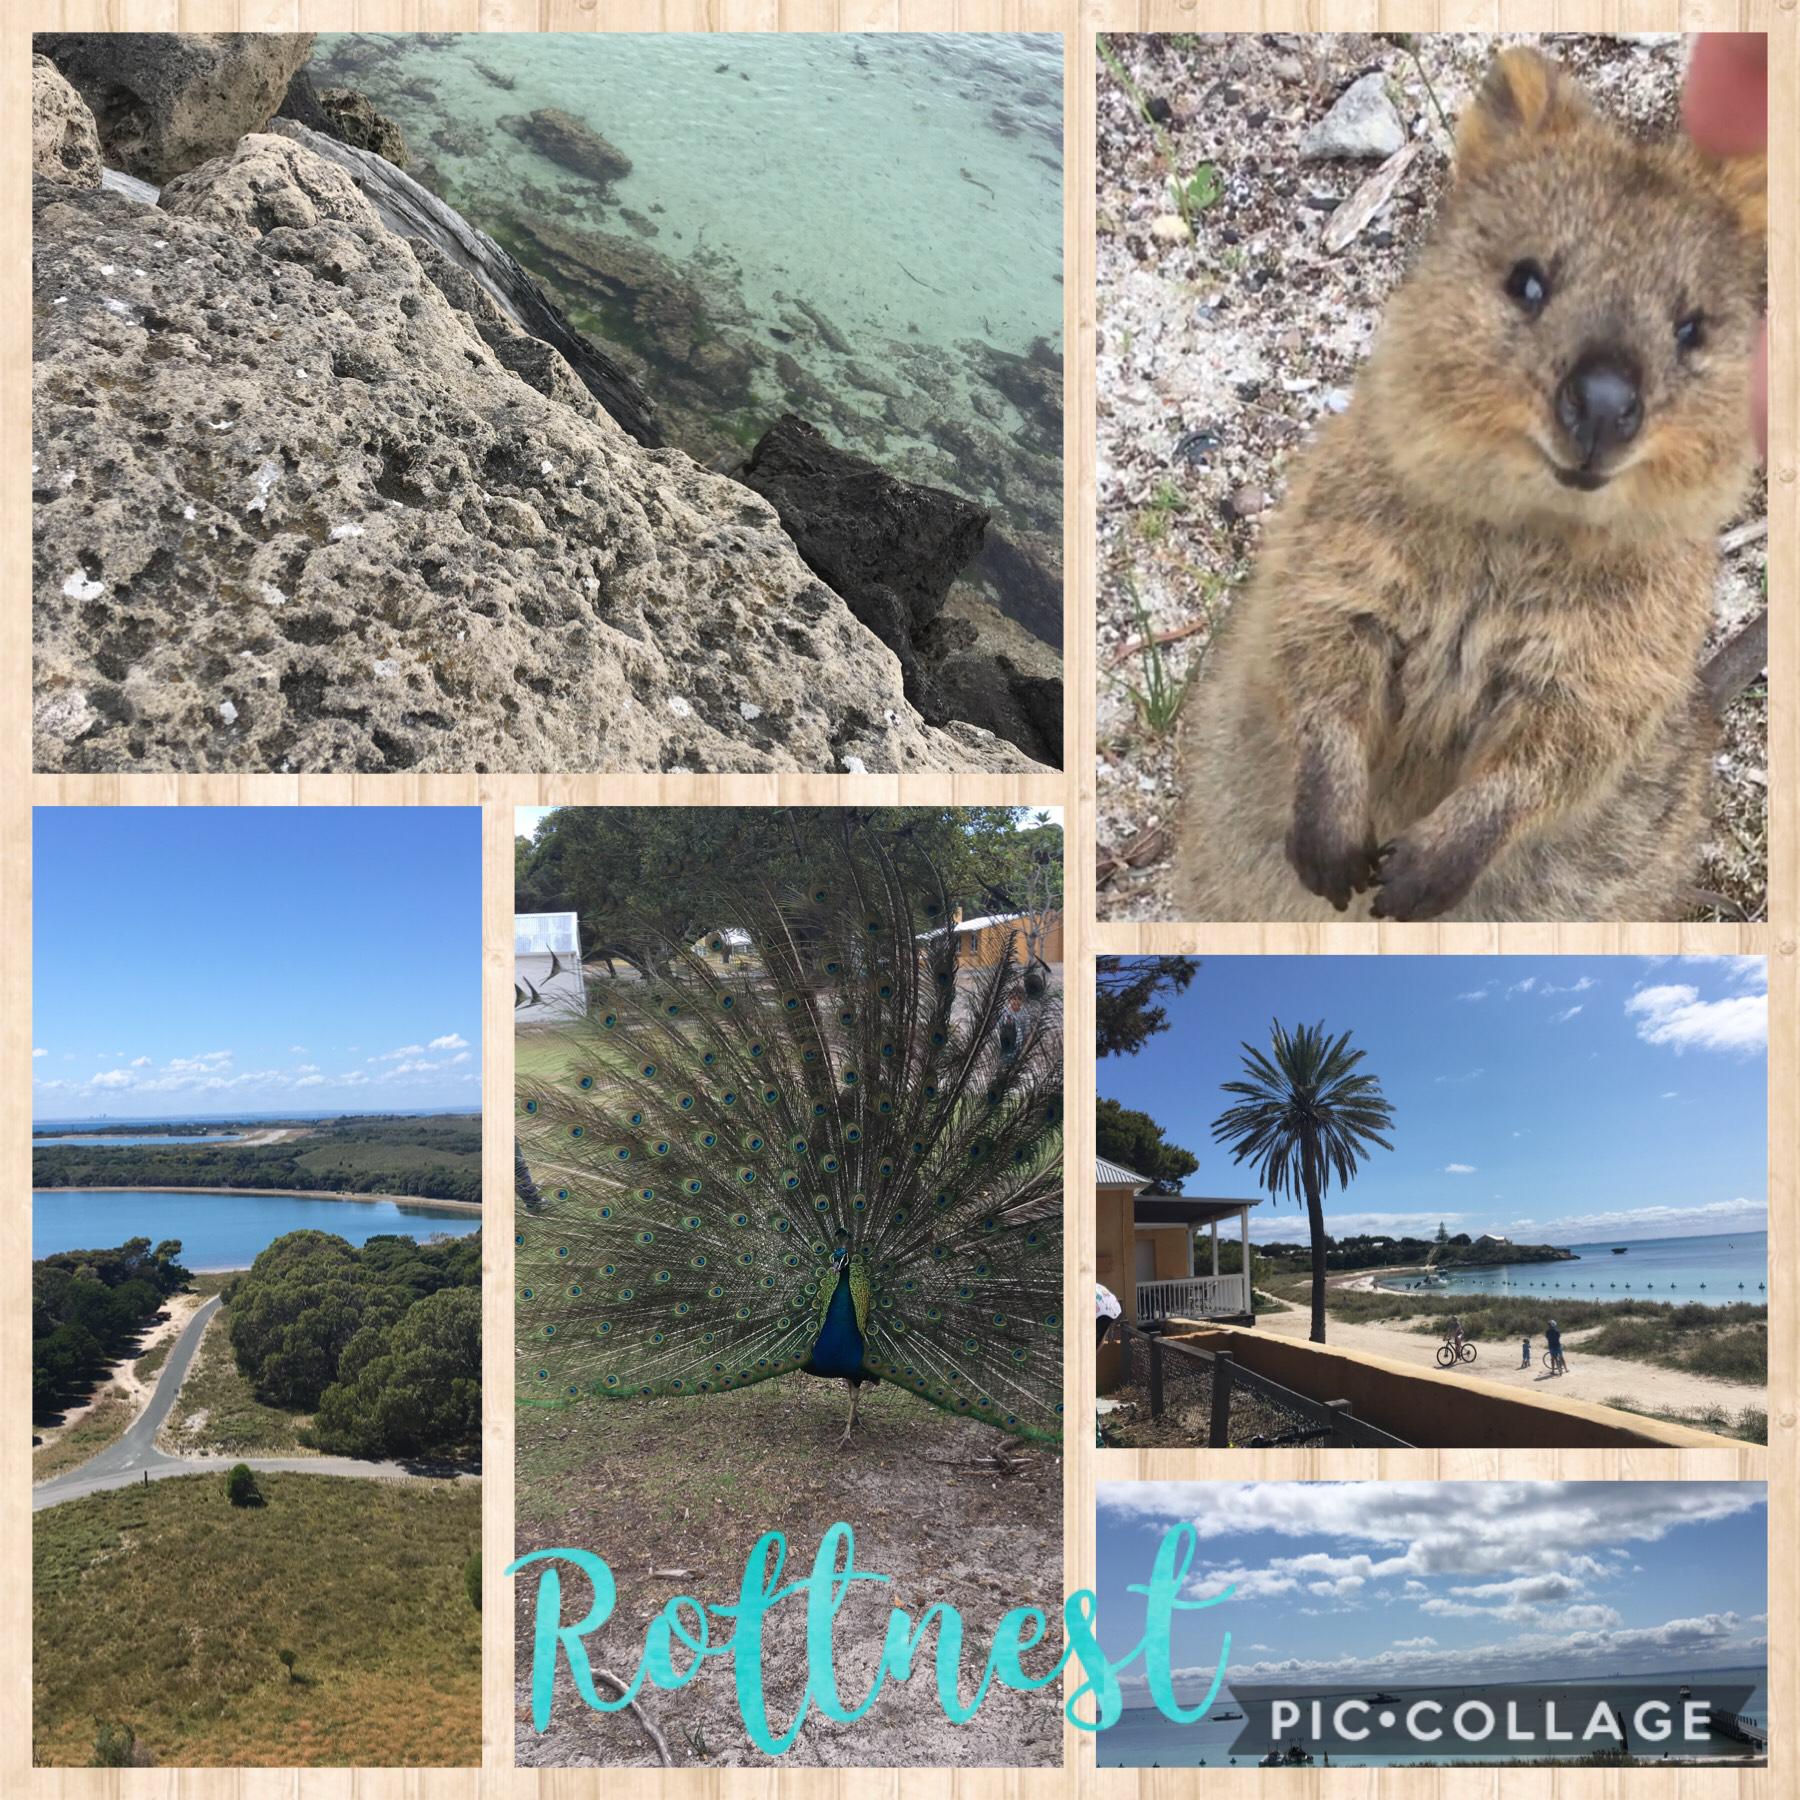 I went to Rottnest and it was a lot of fun, so much quokkas and the beaches were so pretty and relaxing
Like and follow me pls nit to sound desperate or anything 😂😂😂